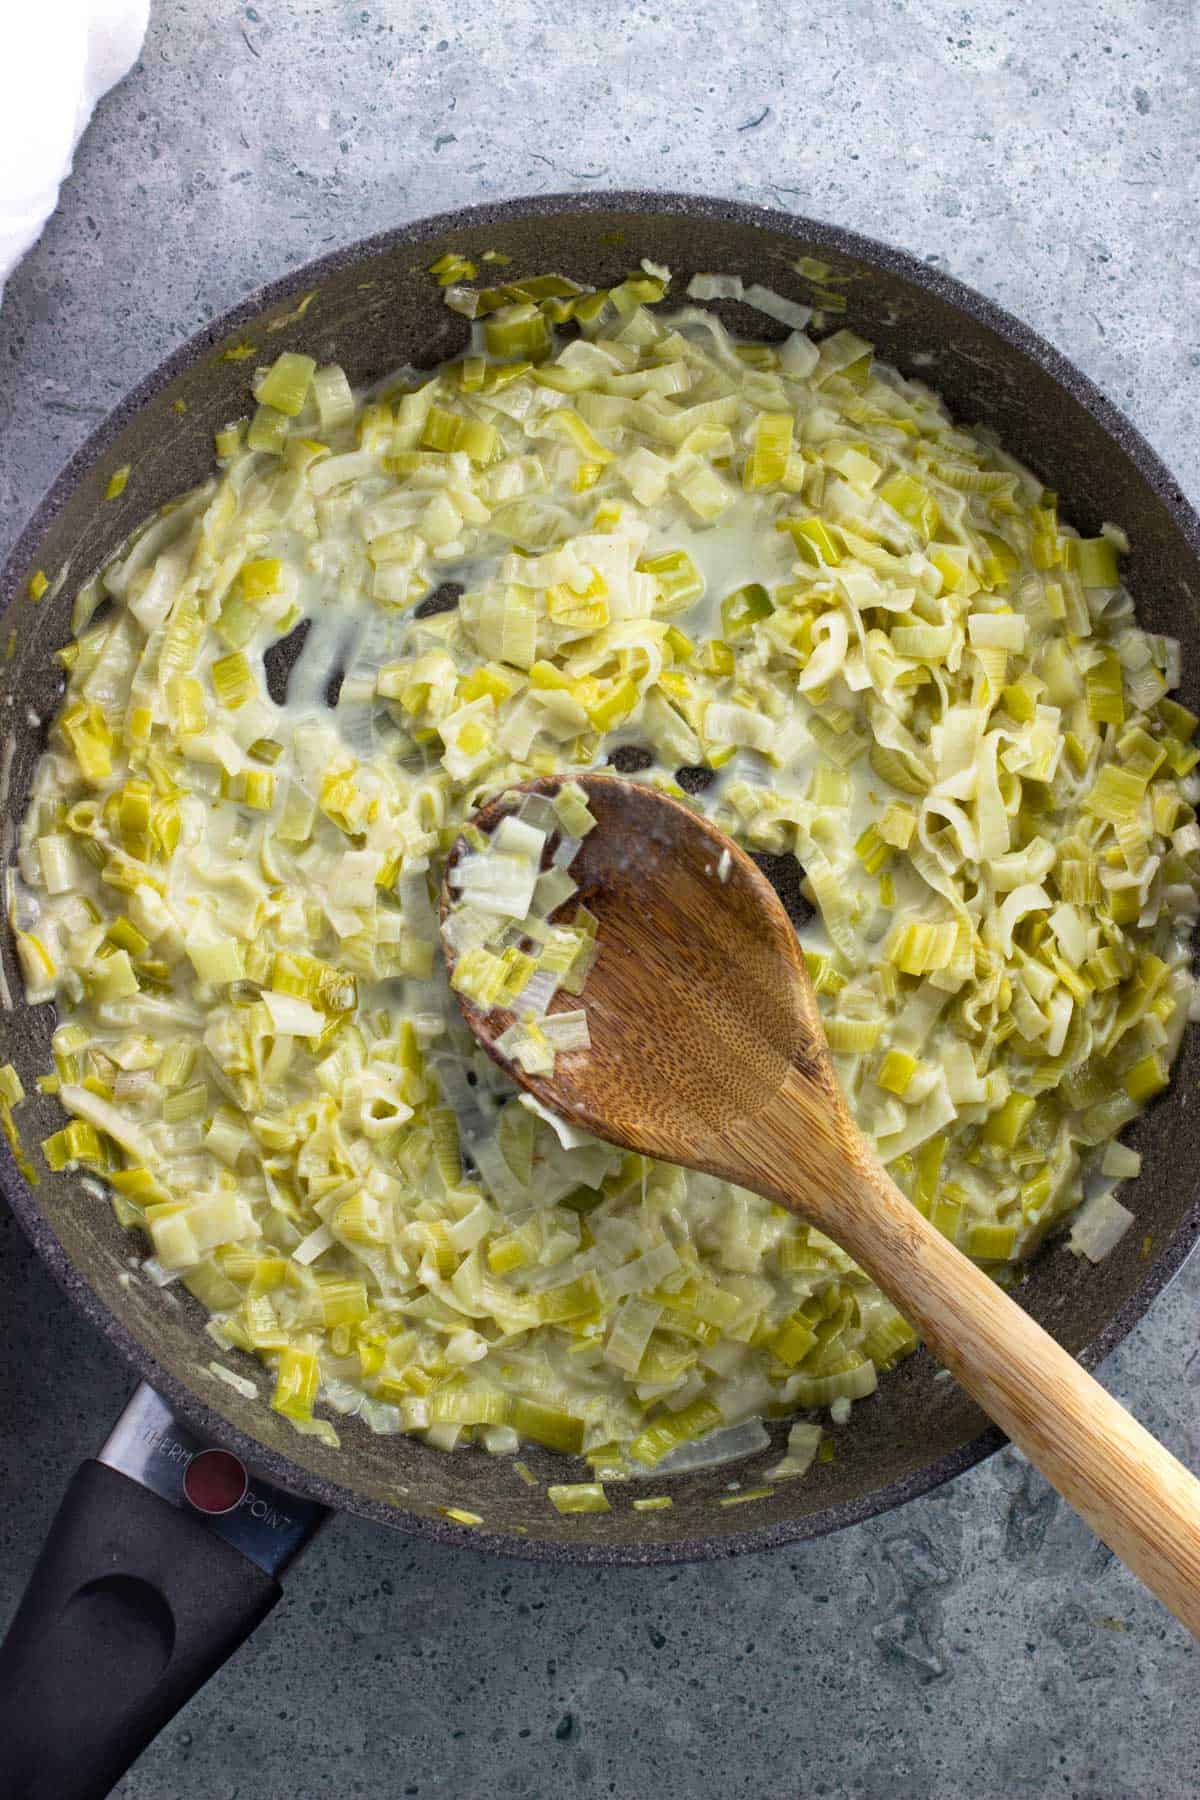 Cream added to the pan of leeks to thicken.